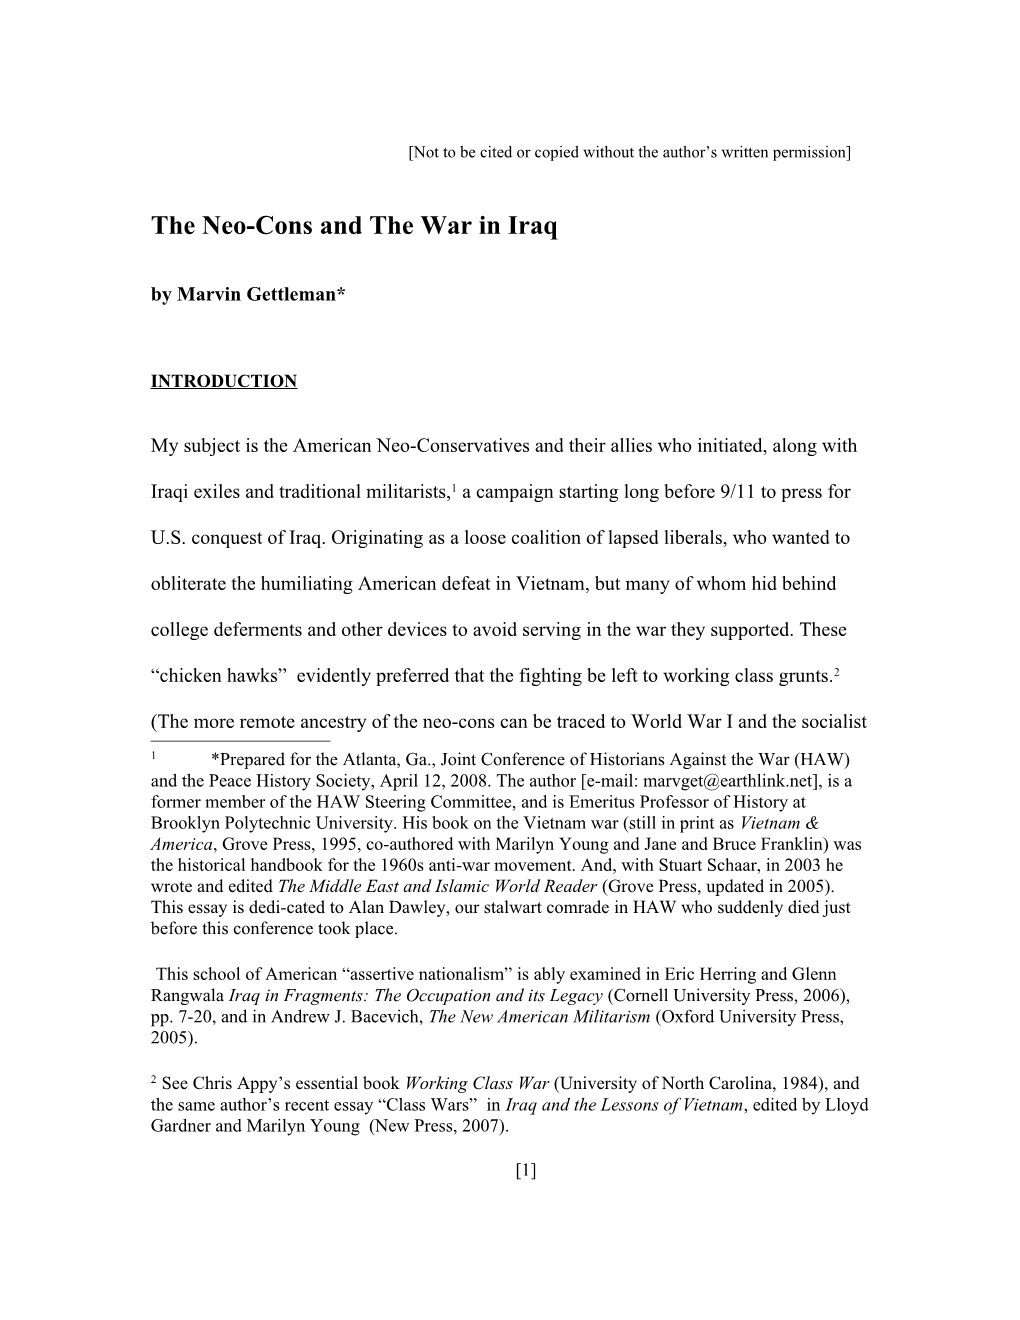 Neo-Conconservatives Before the War Against Iraq; Their Rhetoric and Its Origins